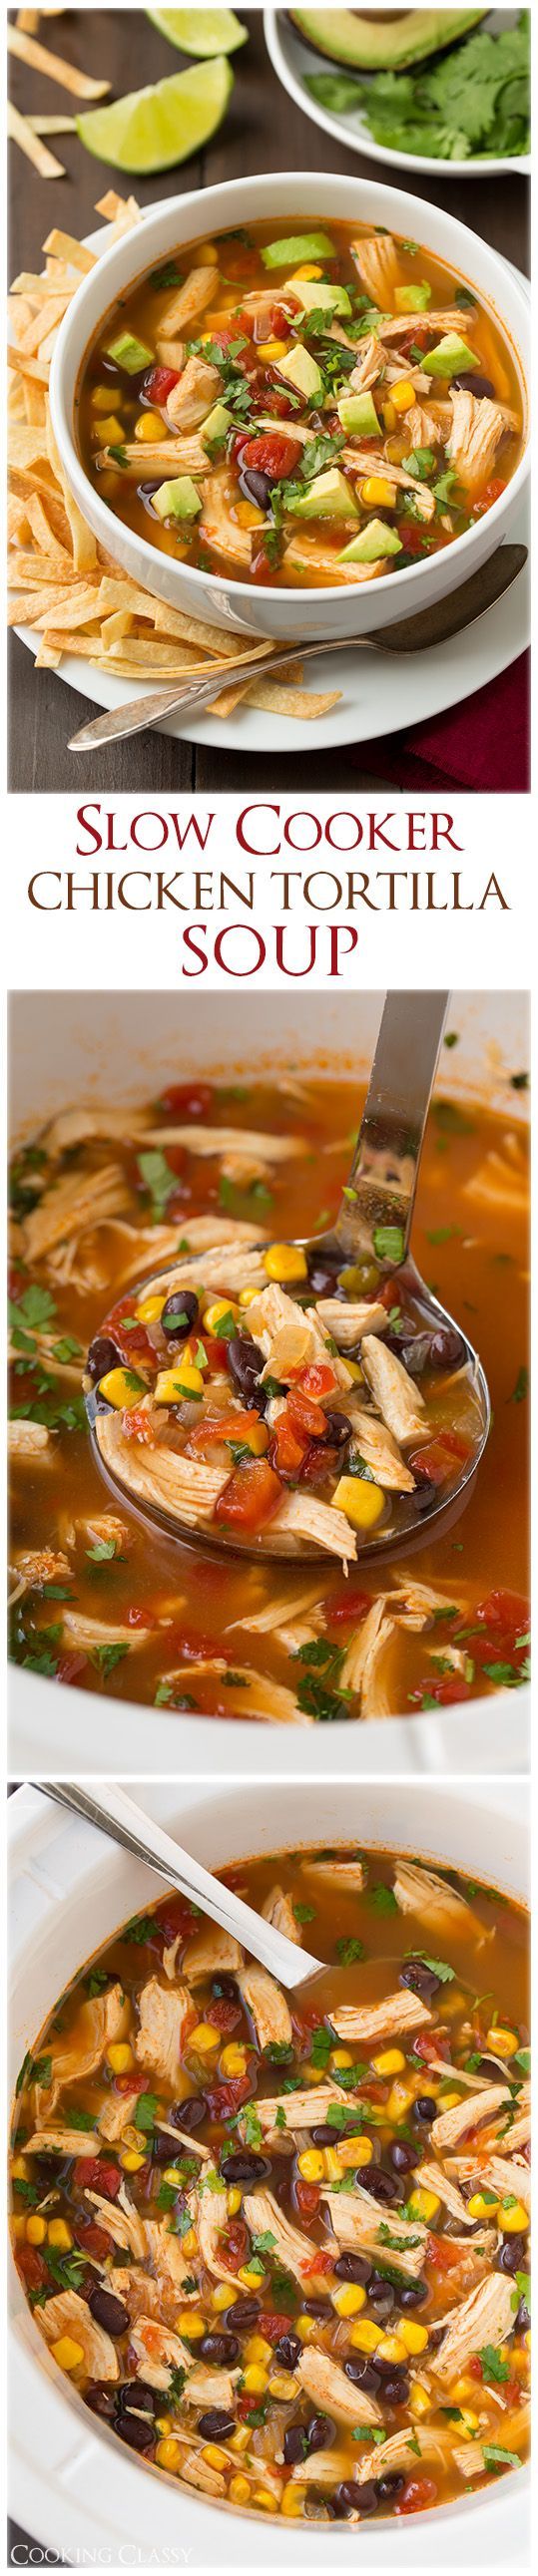 Slow Cooker Chicken Tortilla Soup – my whole family loved this! Adding it to our dinner rotation!